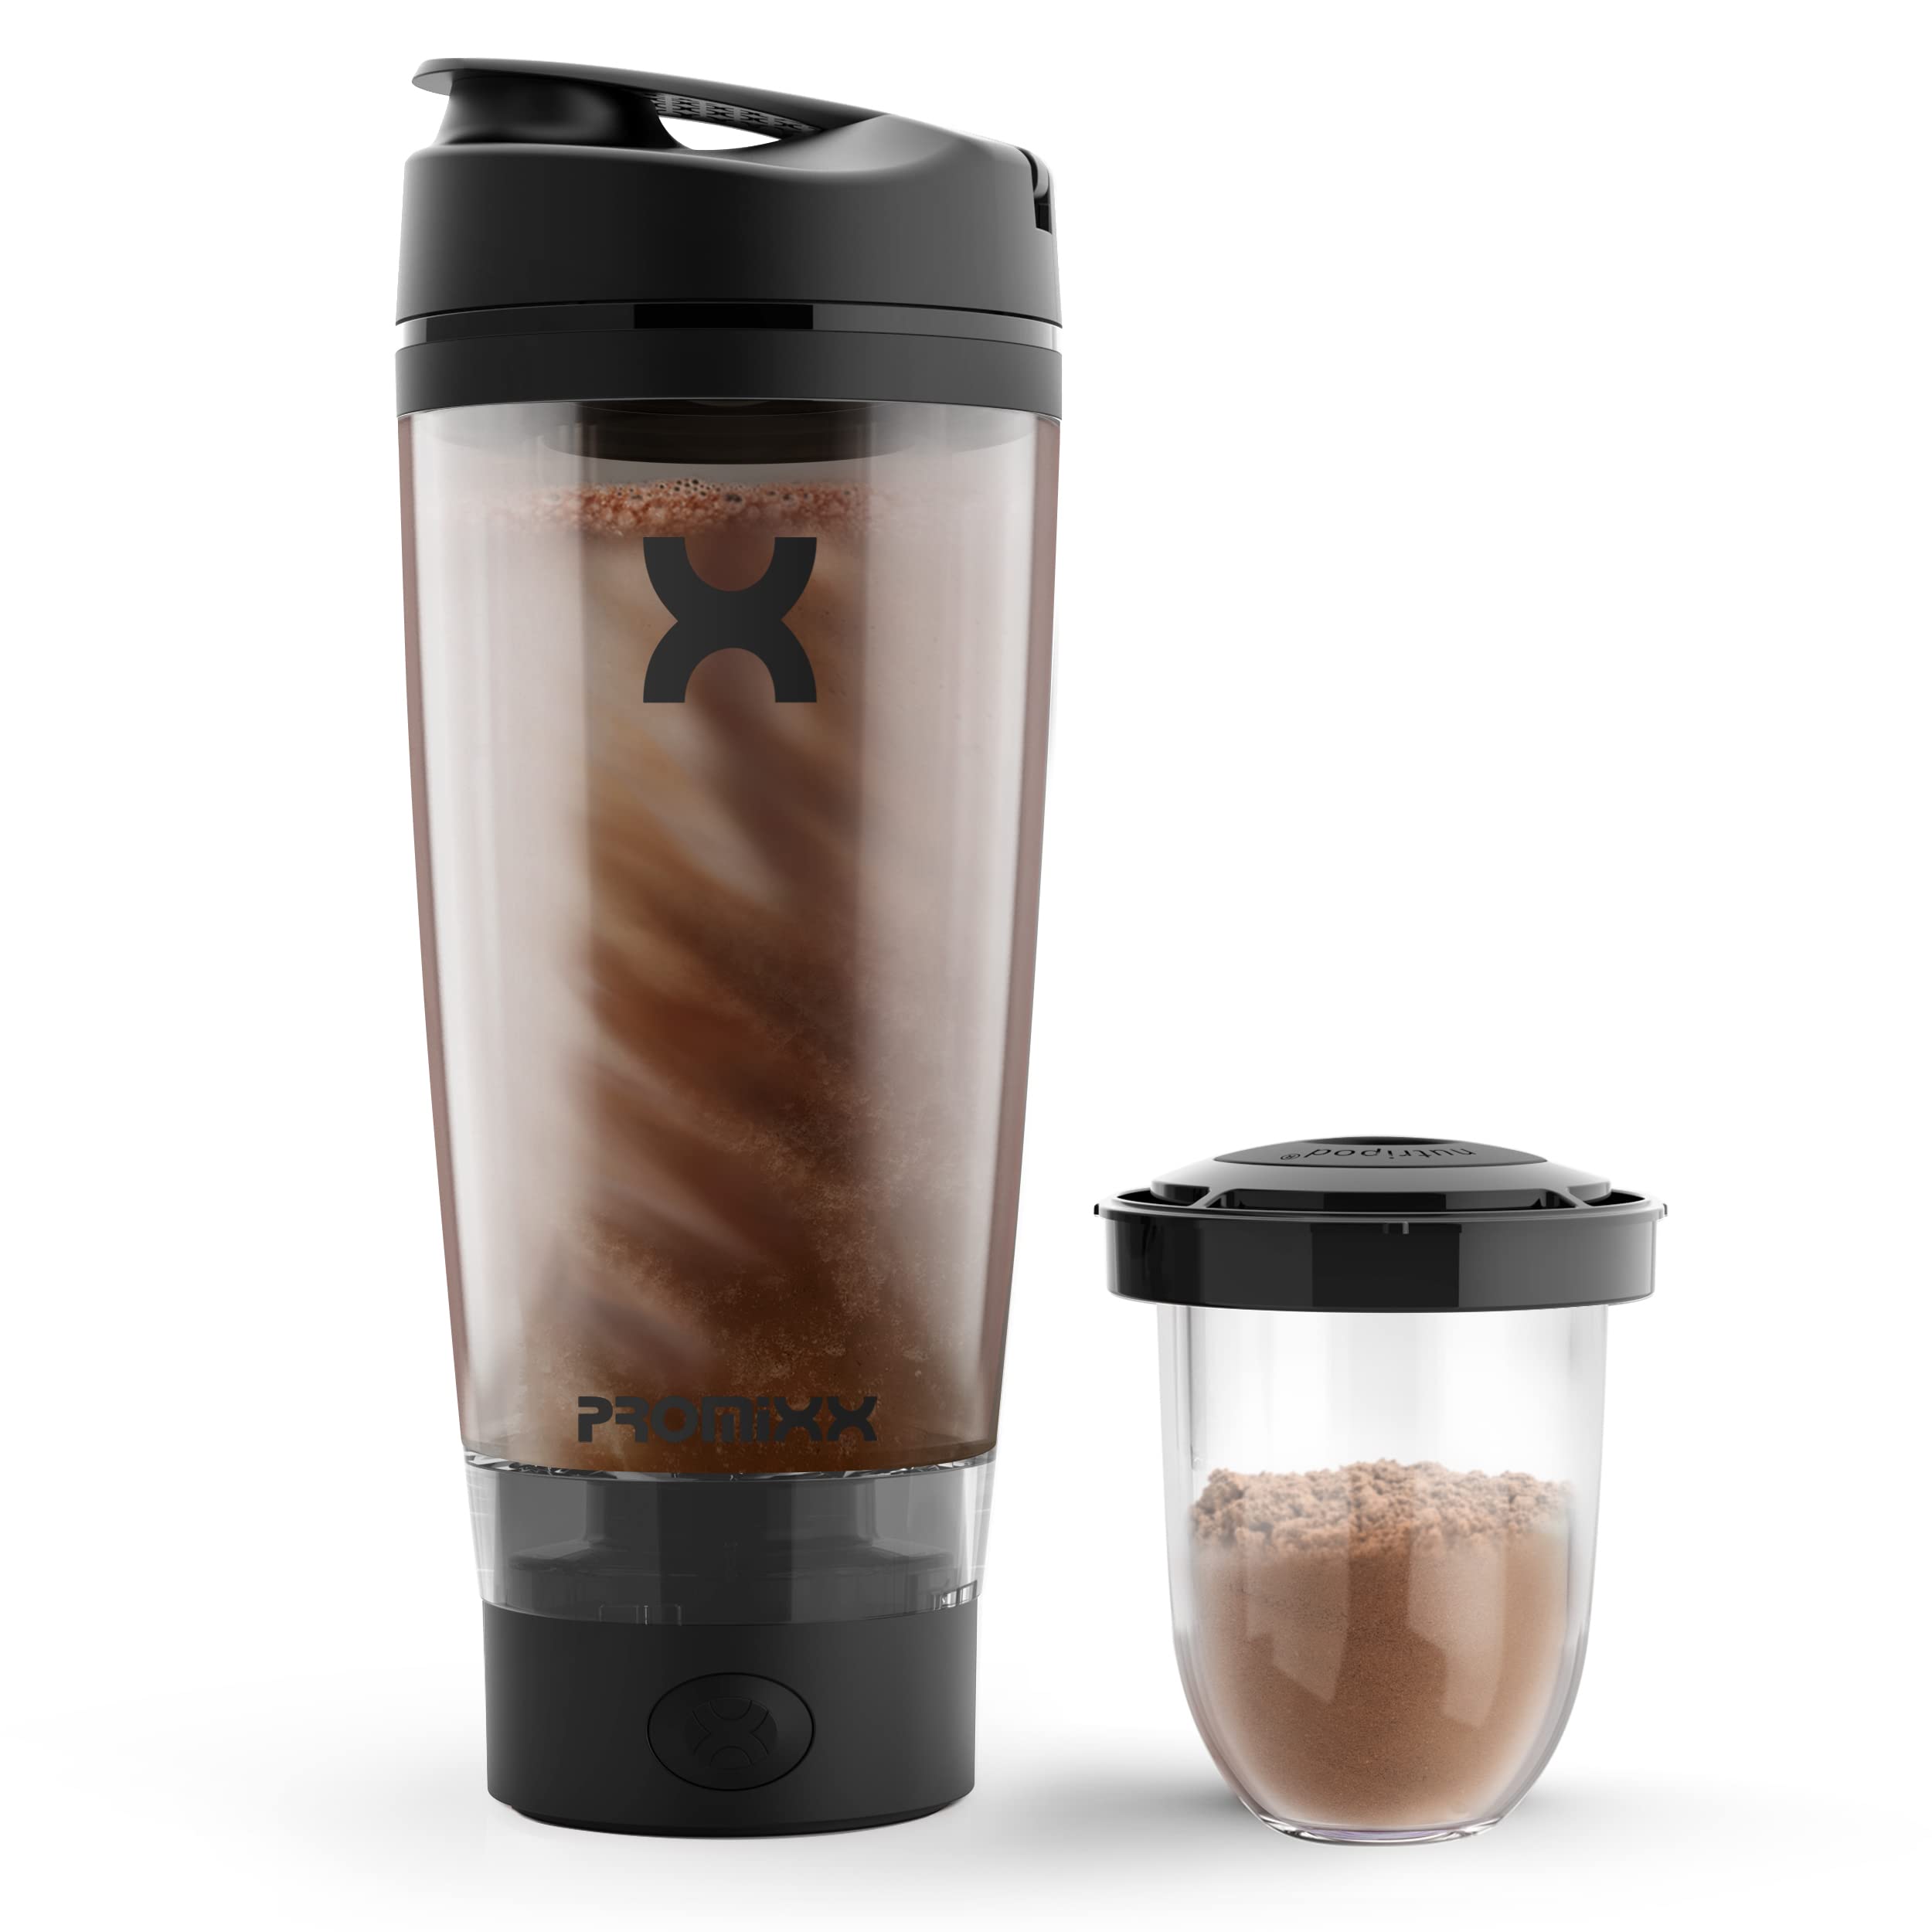 Promixx Charge Shaker Bottle - Device-charging Vortex Mixer with Supplement Storage, Easy-to-clean Tritan Cup (20oz | Black)